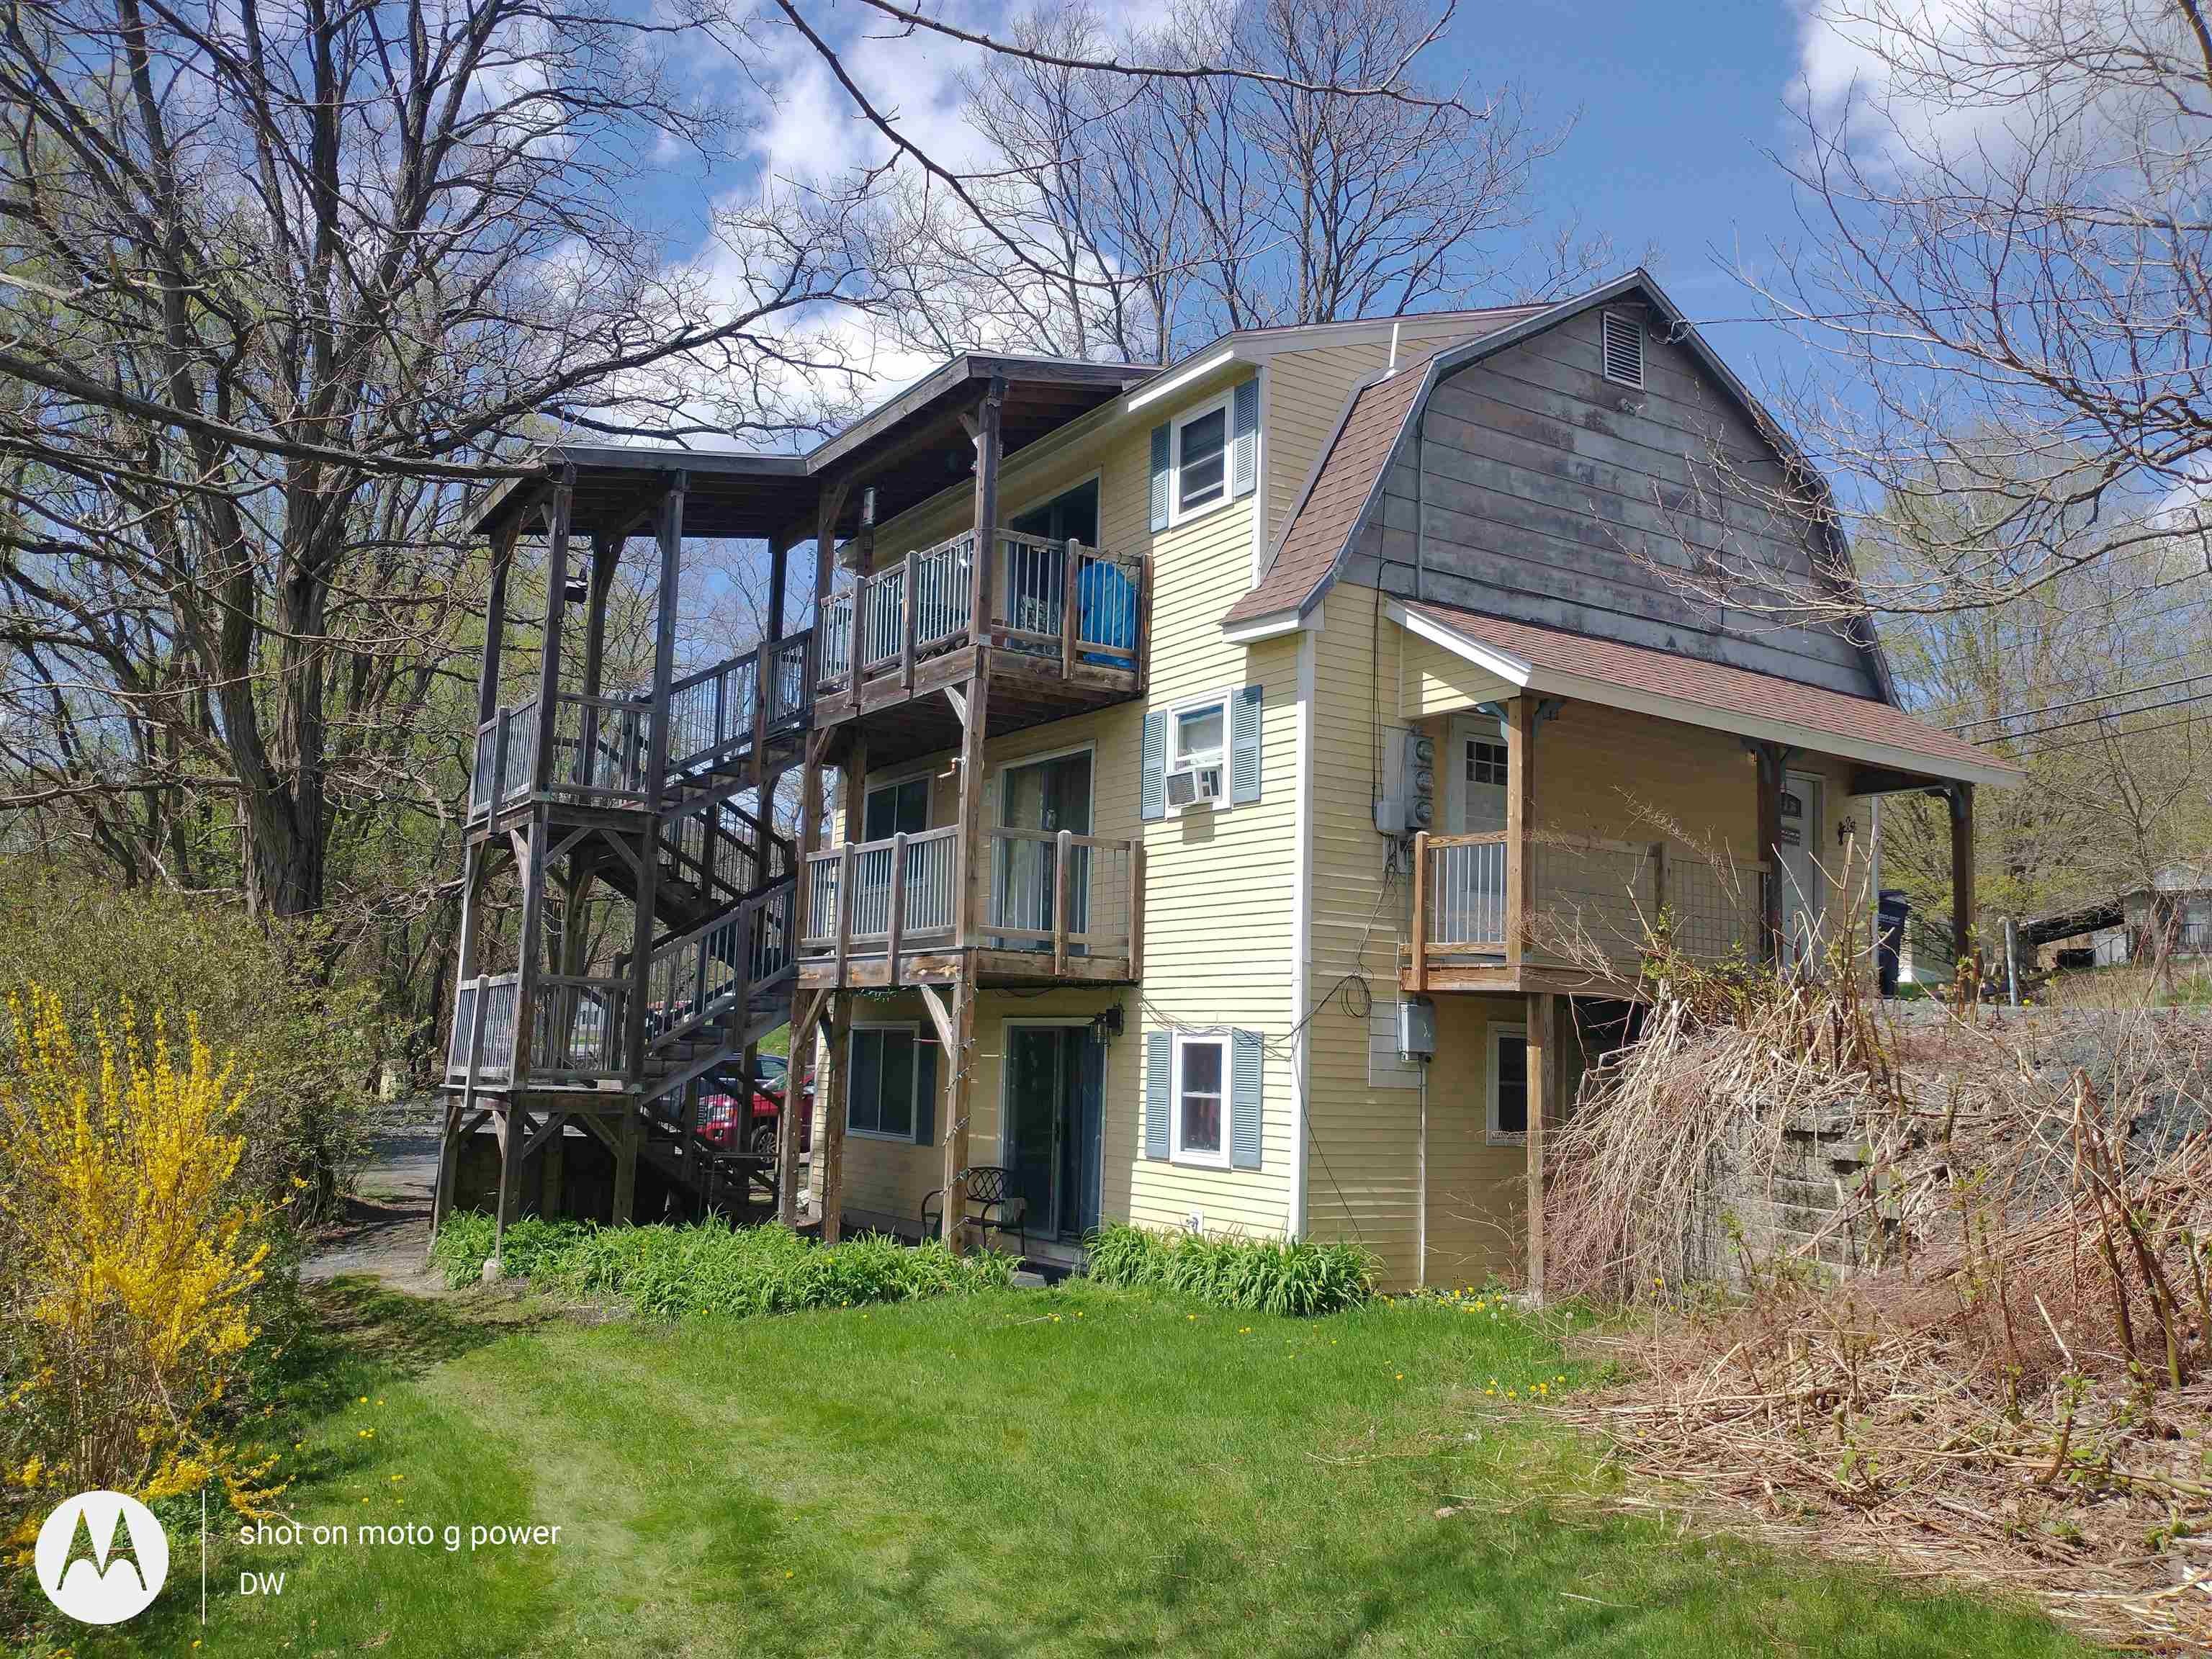 ENFIELD NH Multi Family Homes for sale